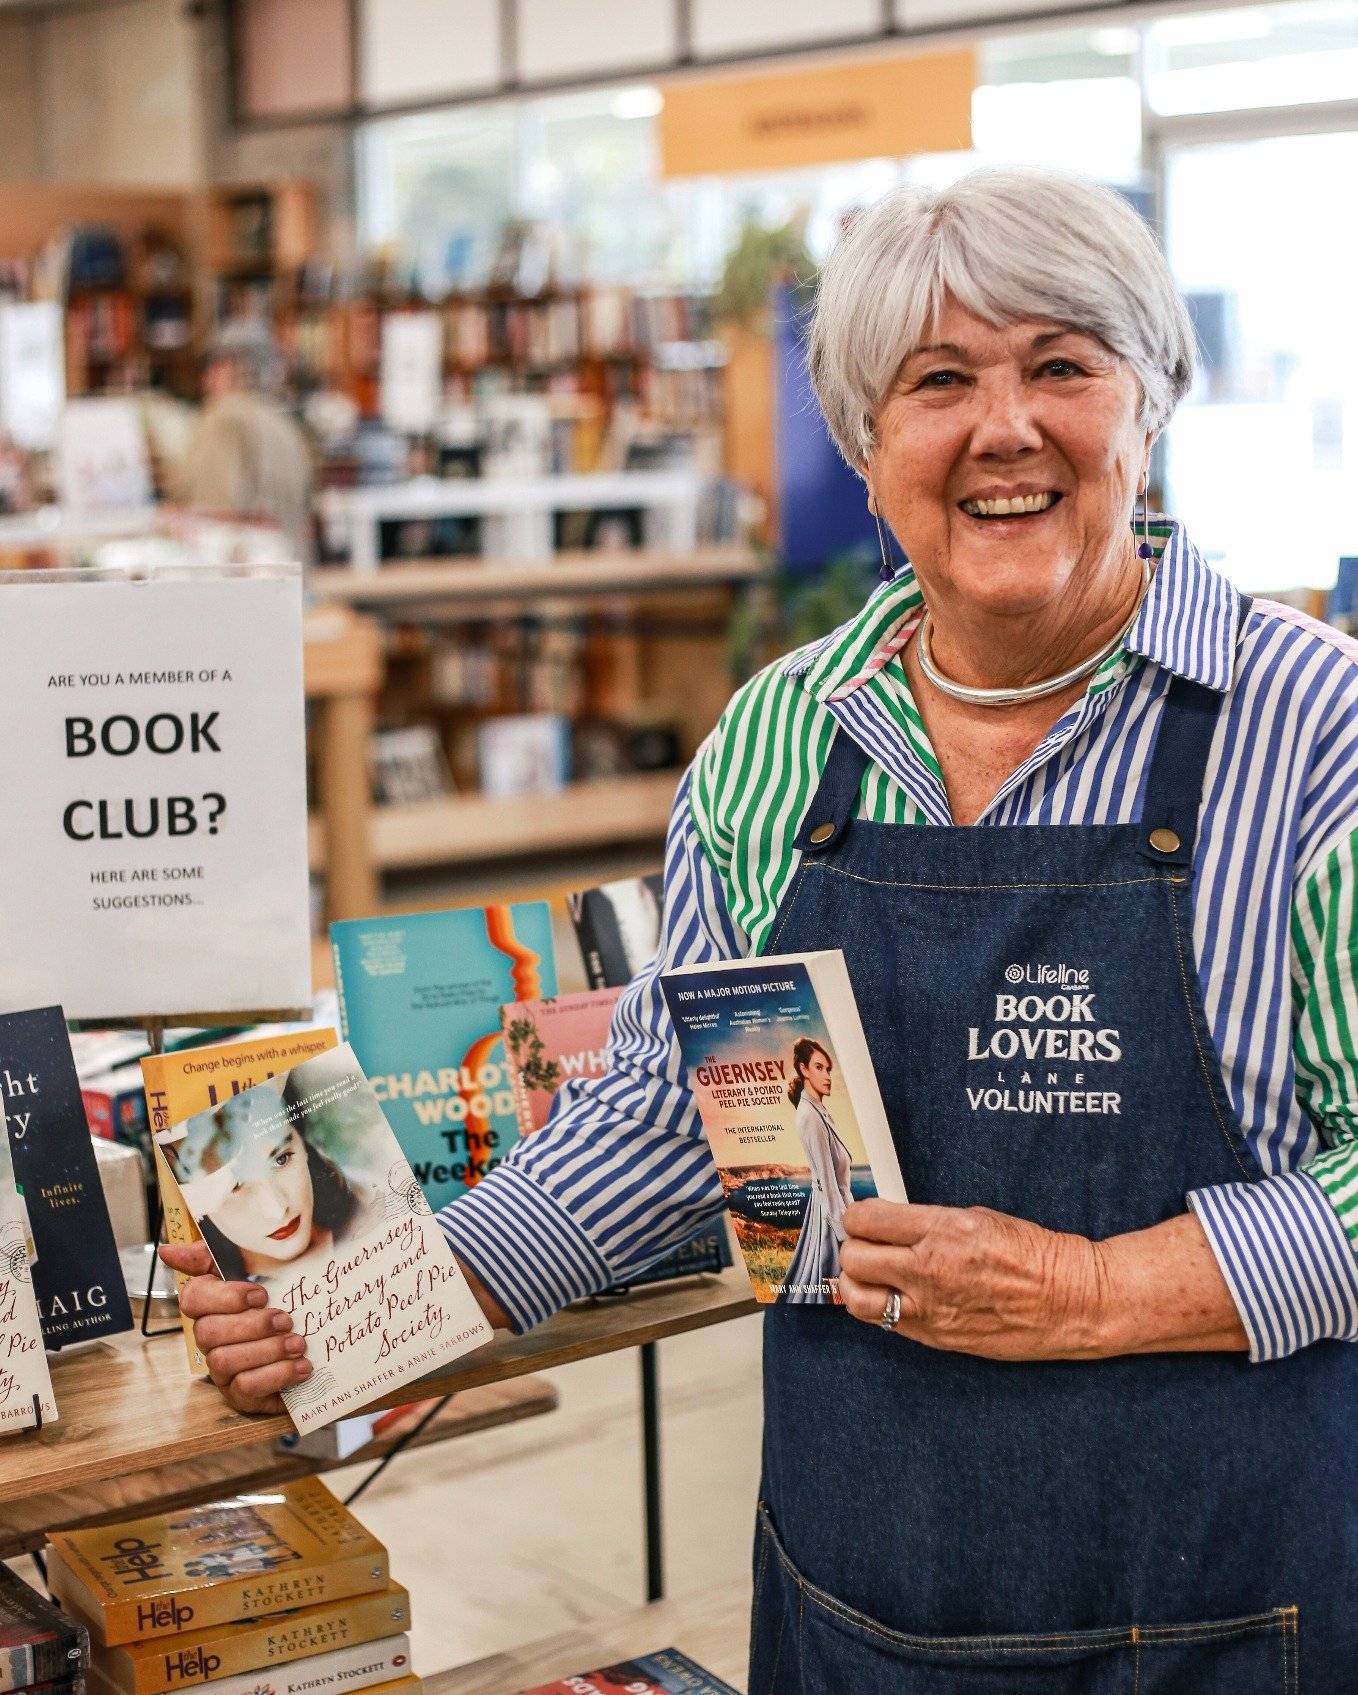 At @booklovers_lane, you'll find an abundance of unique treasures and a team of caring volunteers who make it all possible. 📚✨

Discover the wonders of our incredible markets this weekend!